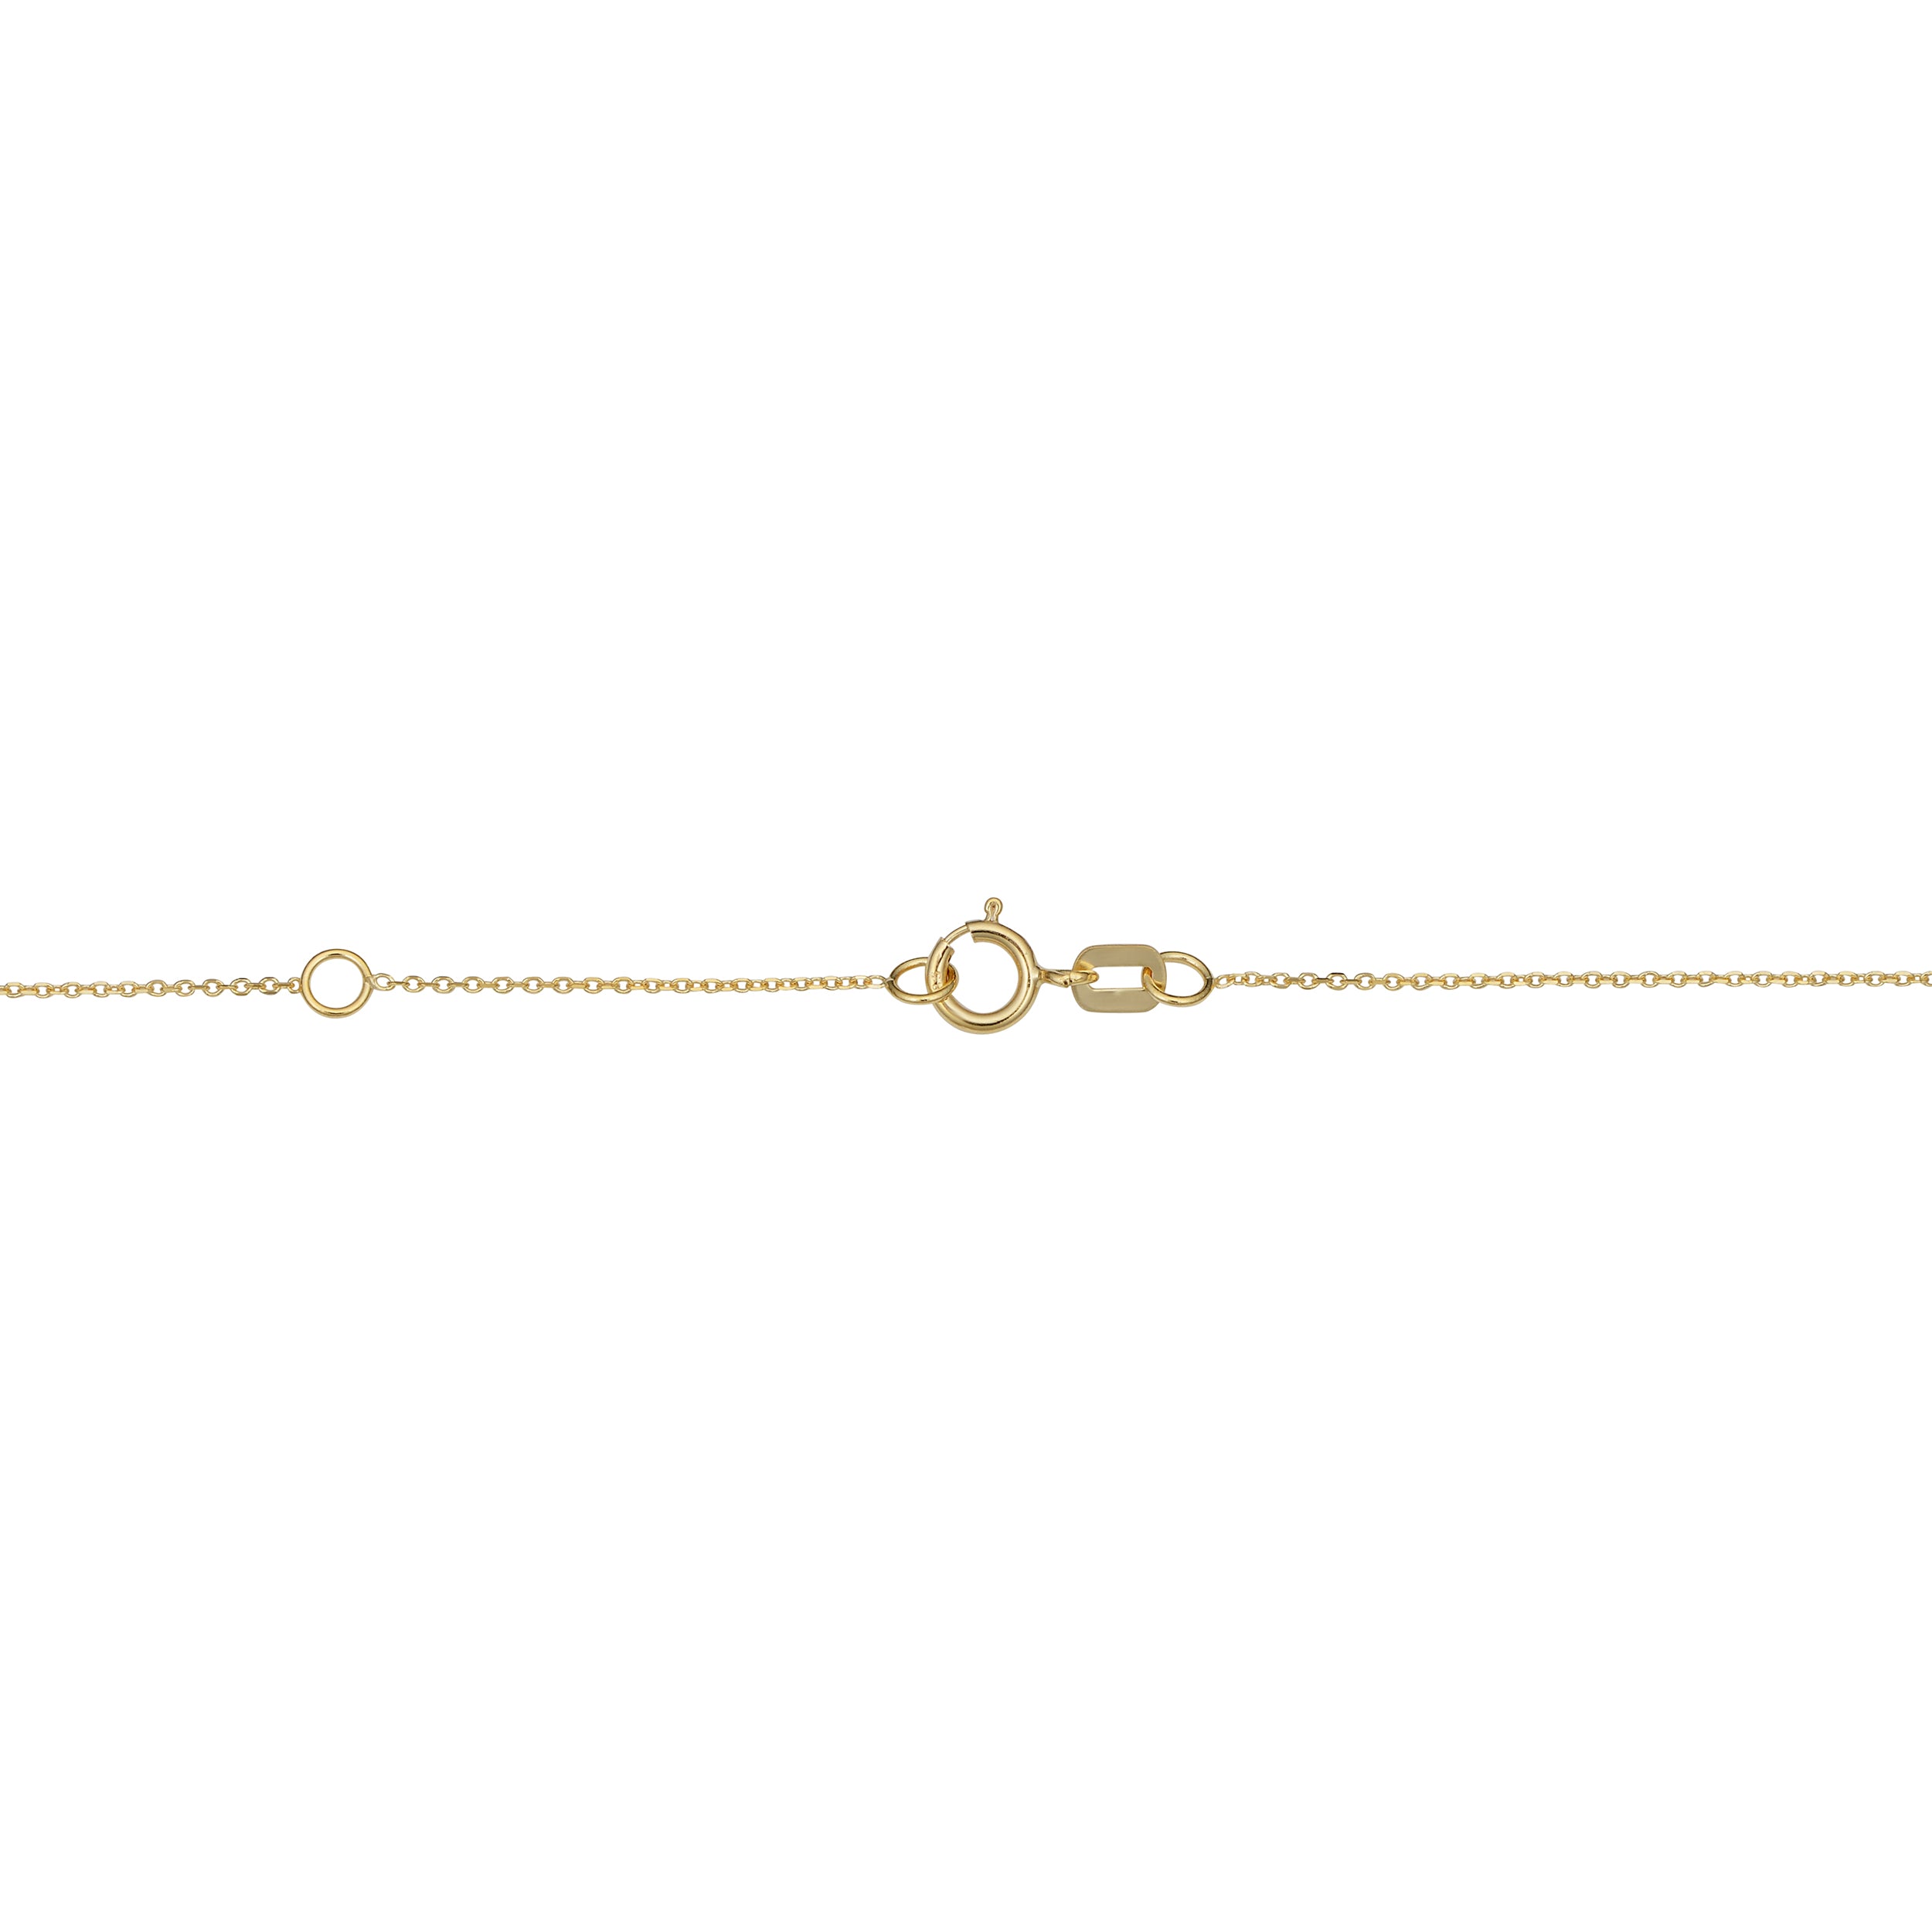 14k Yellow Gold Bar Drop Adjustable Necklace, 18" fine designer jewelry for men and women